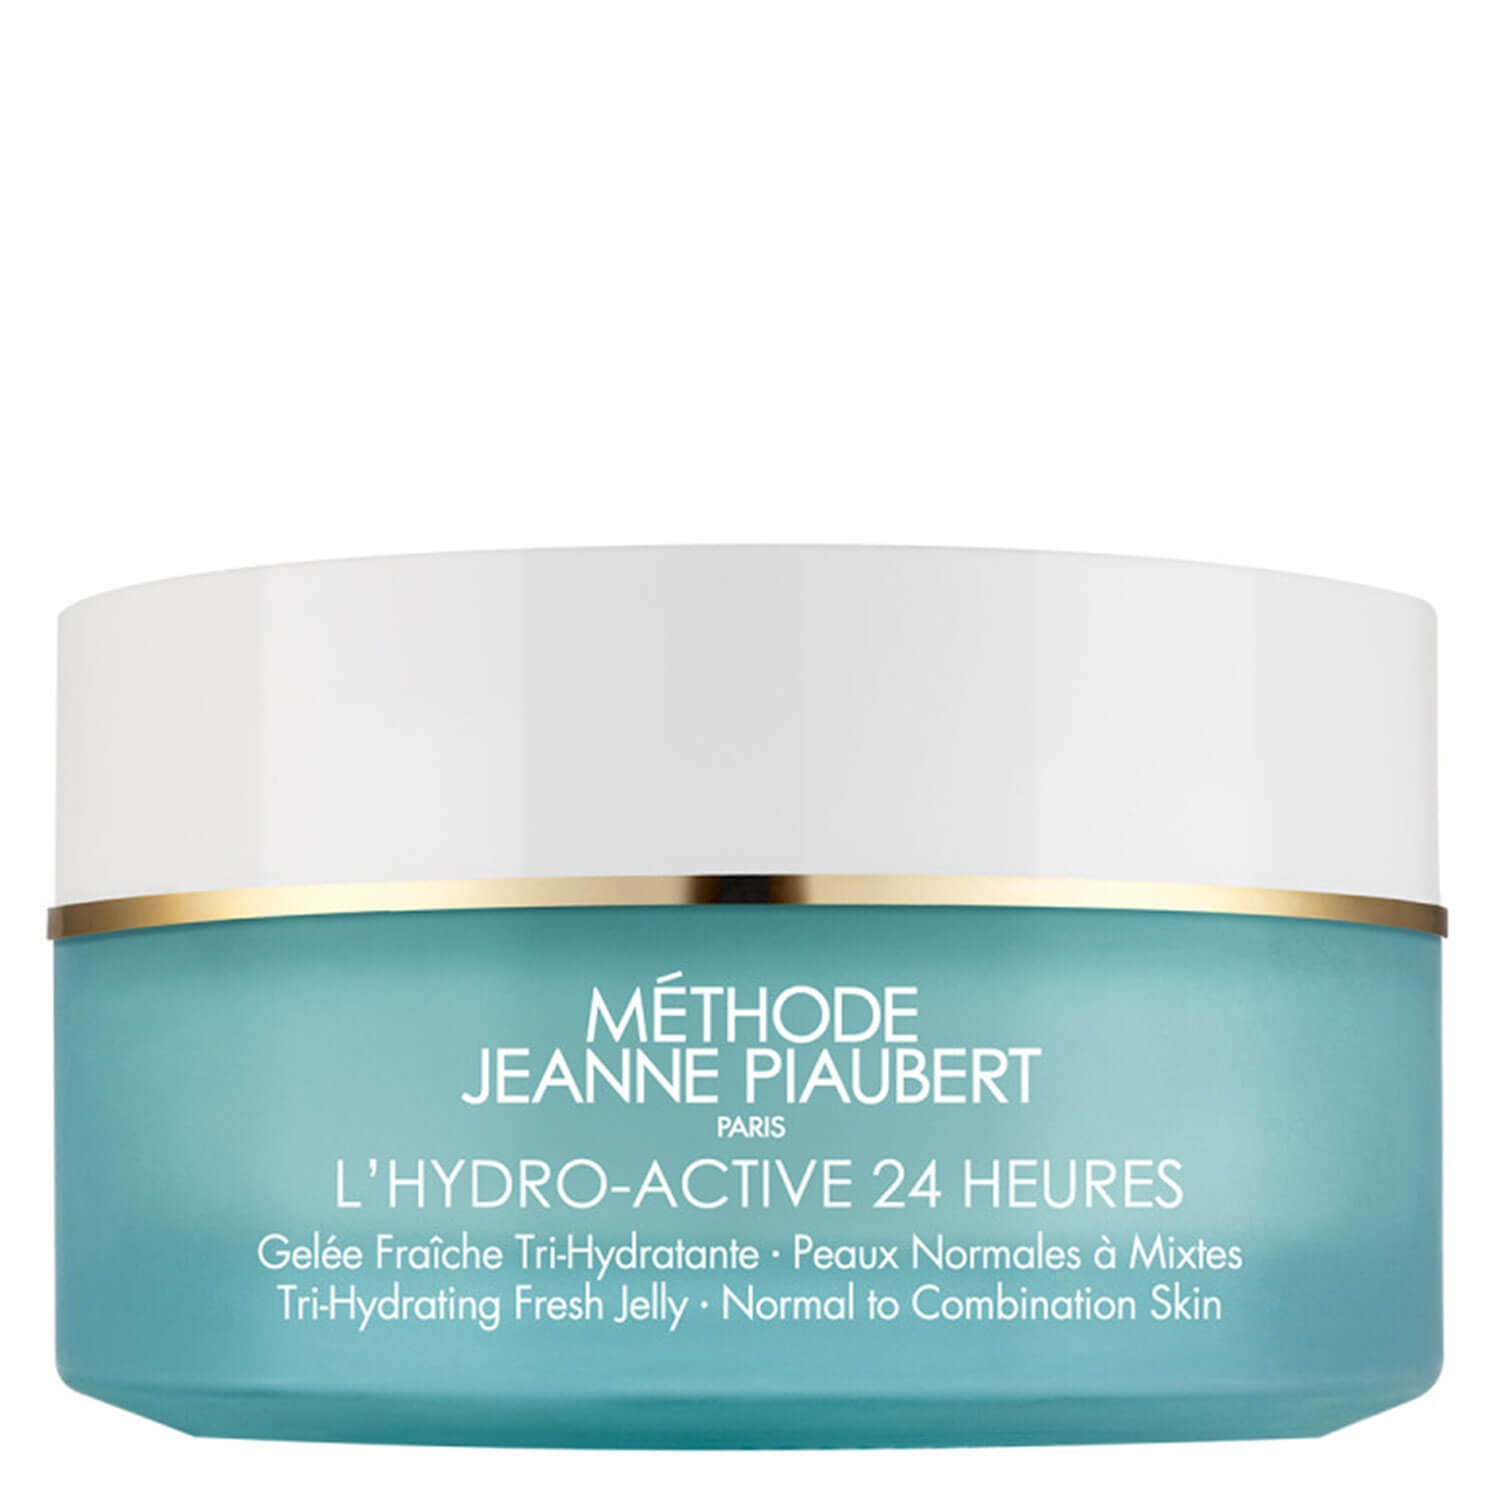 Product image from Jeanne Piaubert - L'Hydro-Active 24 Heures Gelée Fraîche Tri-Hydratante